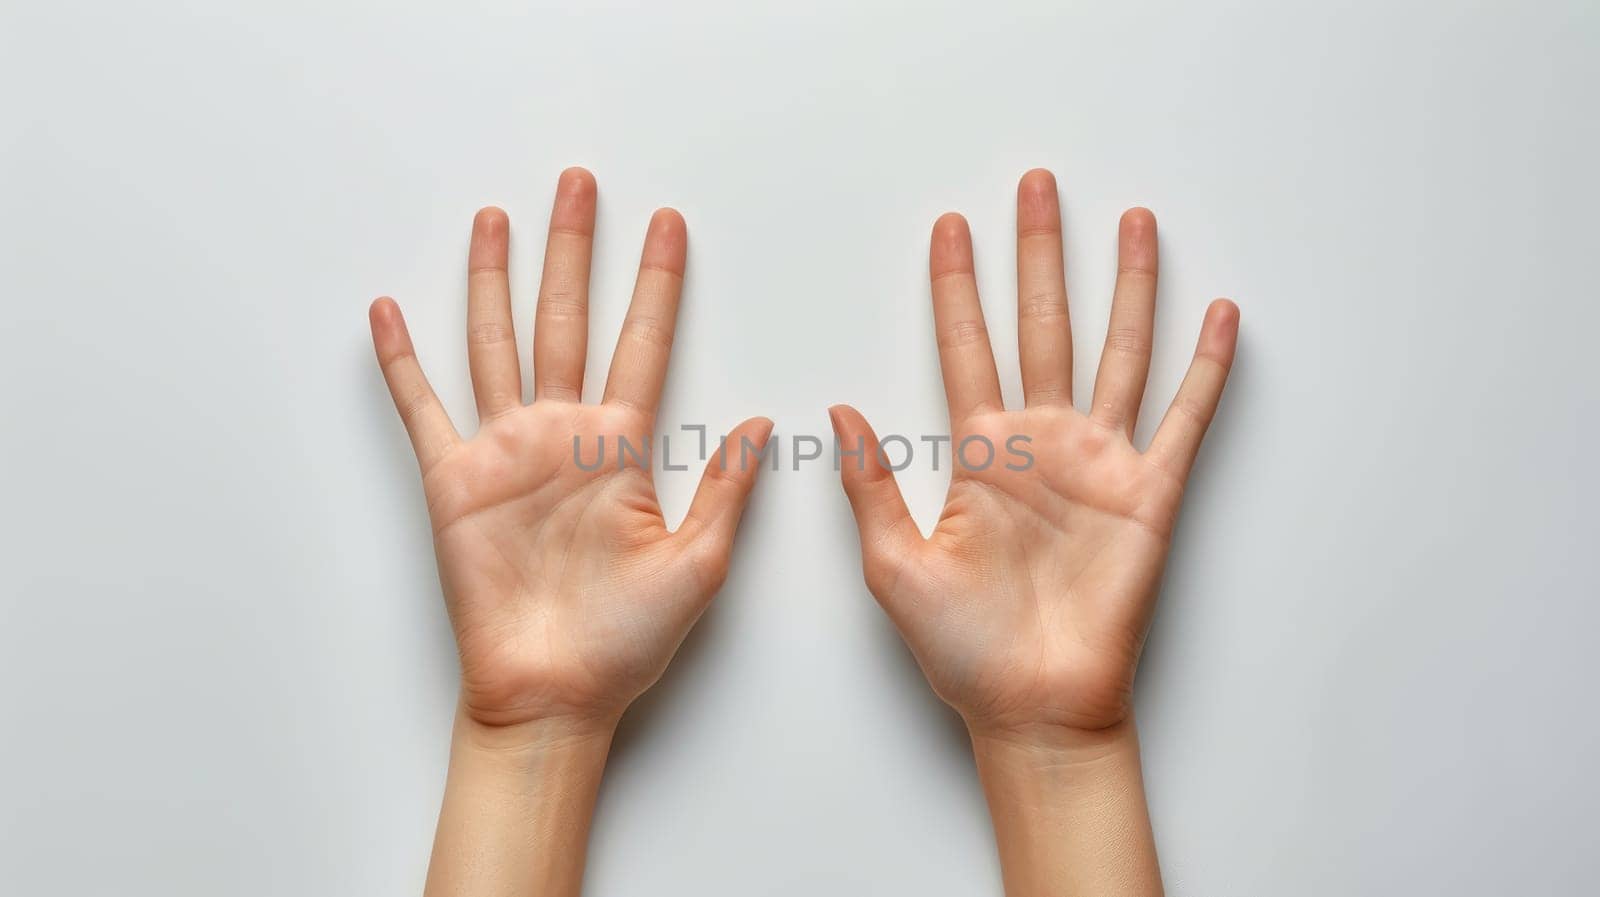 Two hands with nails painted in a light pink color. The hands are positioned in a way that they are facing each other, with the fingers spread apart. Scene is one of relaxation and carefree enjoyment